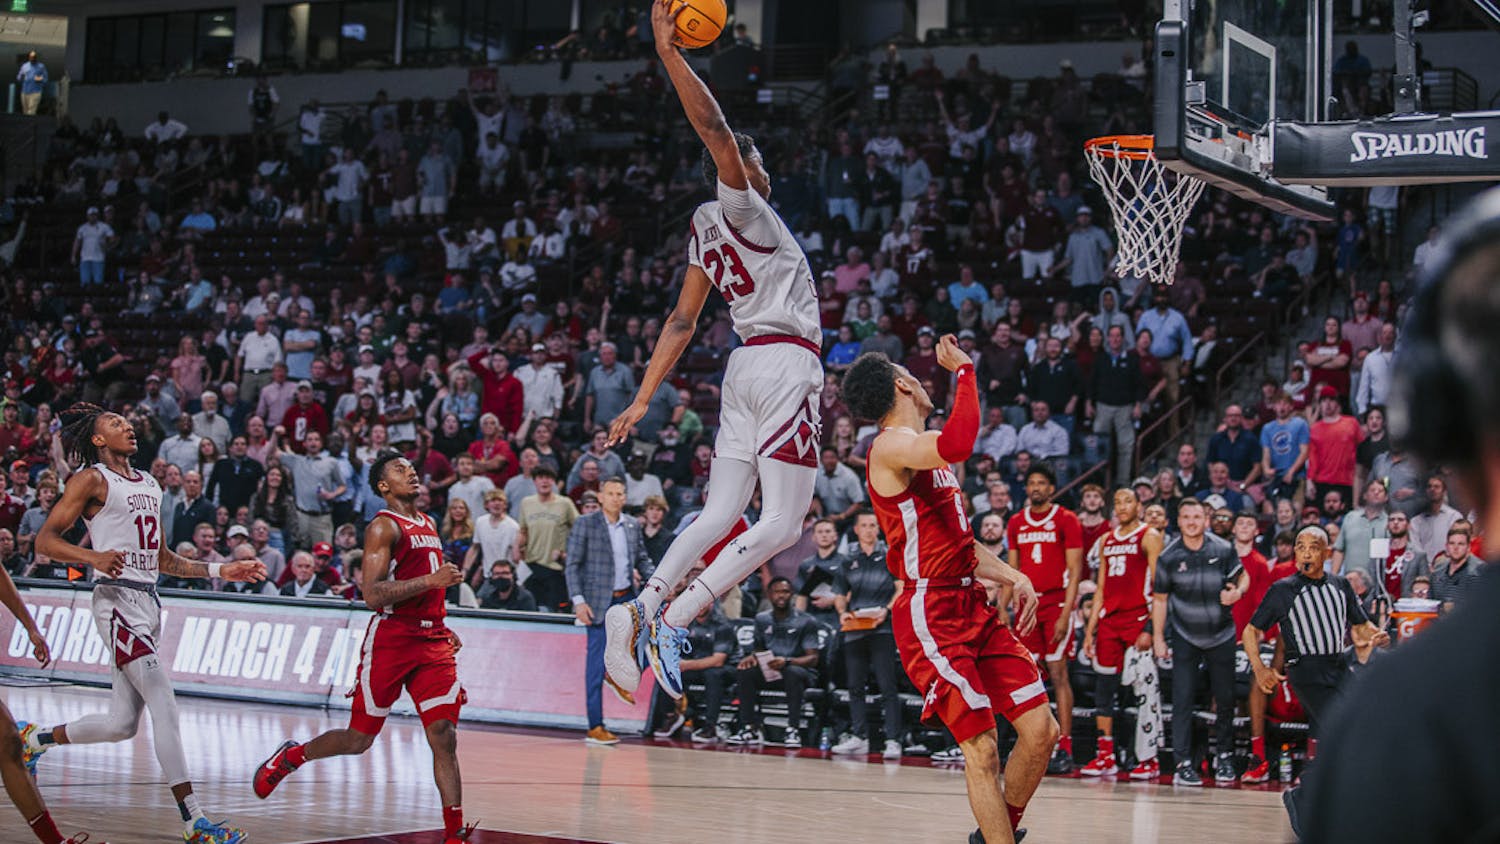 Freshman forward GG Jackson extends his arm back for the tomahawk dunk during the fast break in the match against Alabama at Colonial Life Arena on Feb. 22, 2023. The Crimson Tide beat the Gamecocks 78-76 in overtime.&nbsp;